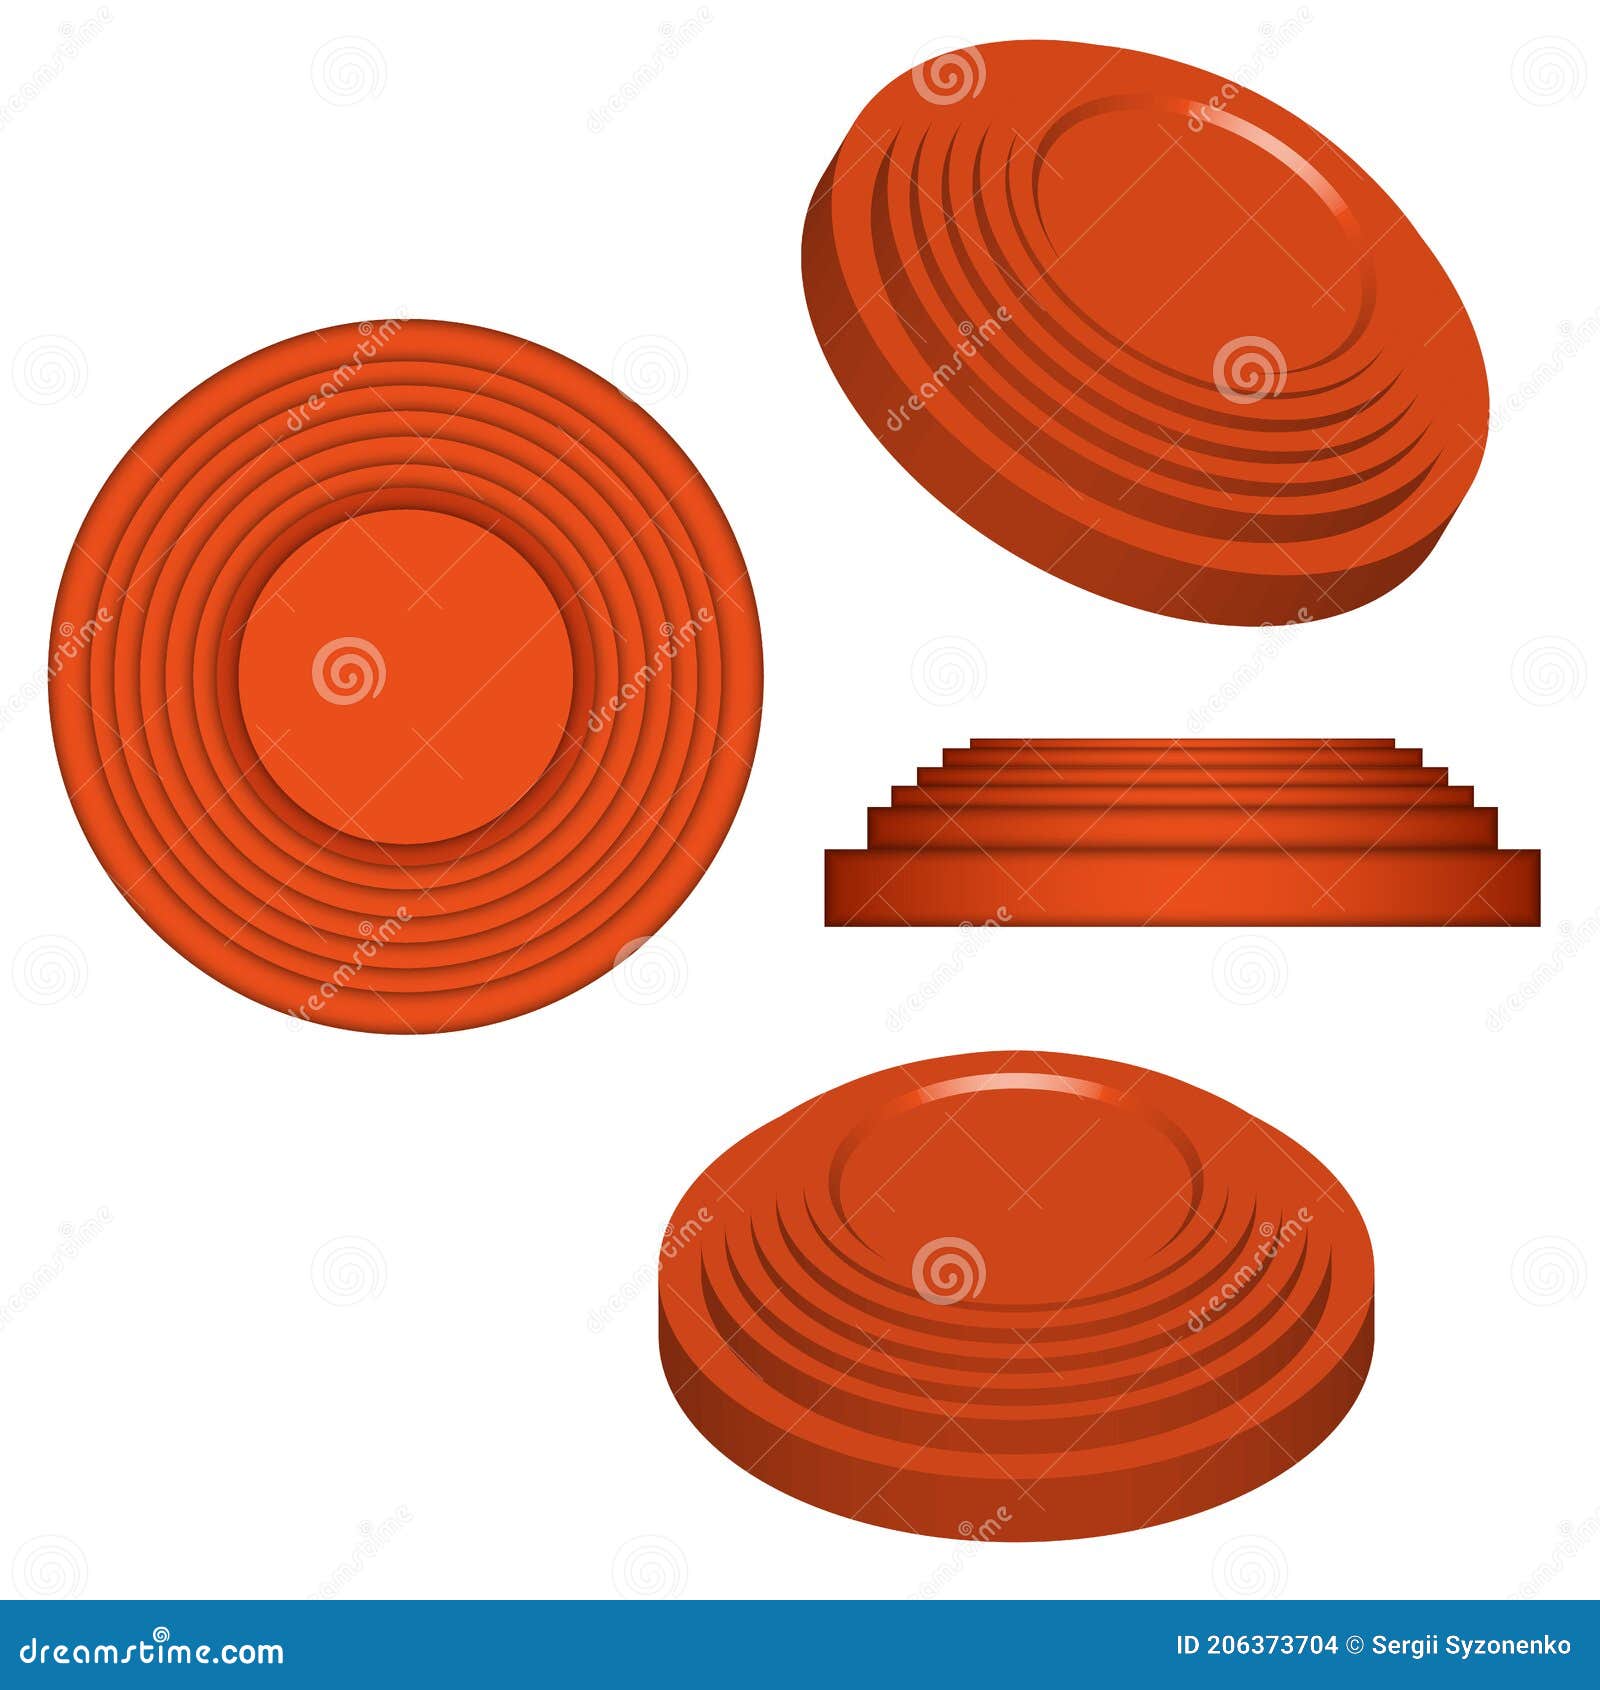 clay targets  on white, orange plates for clay pigeon shooting, 3d  model isometric 